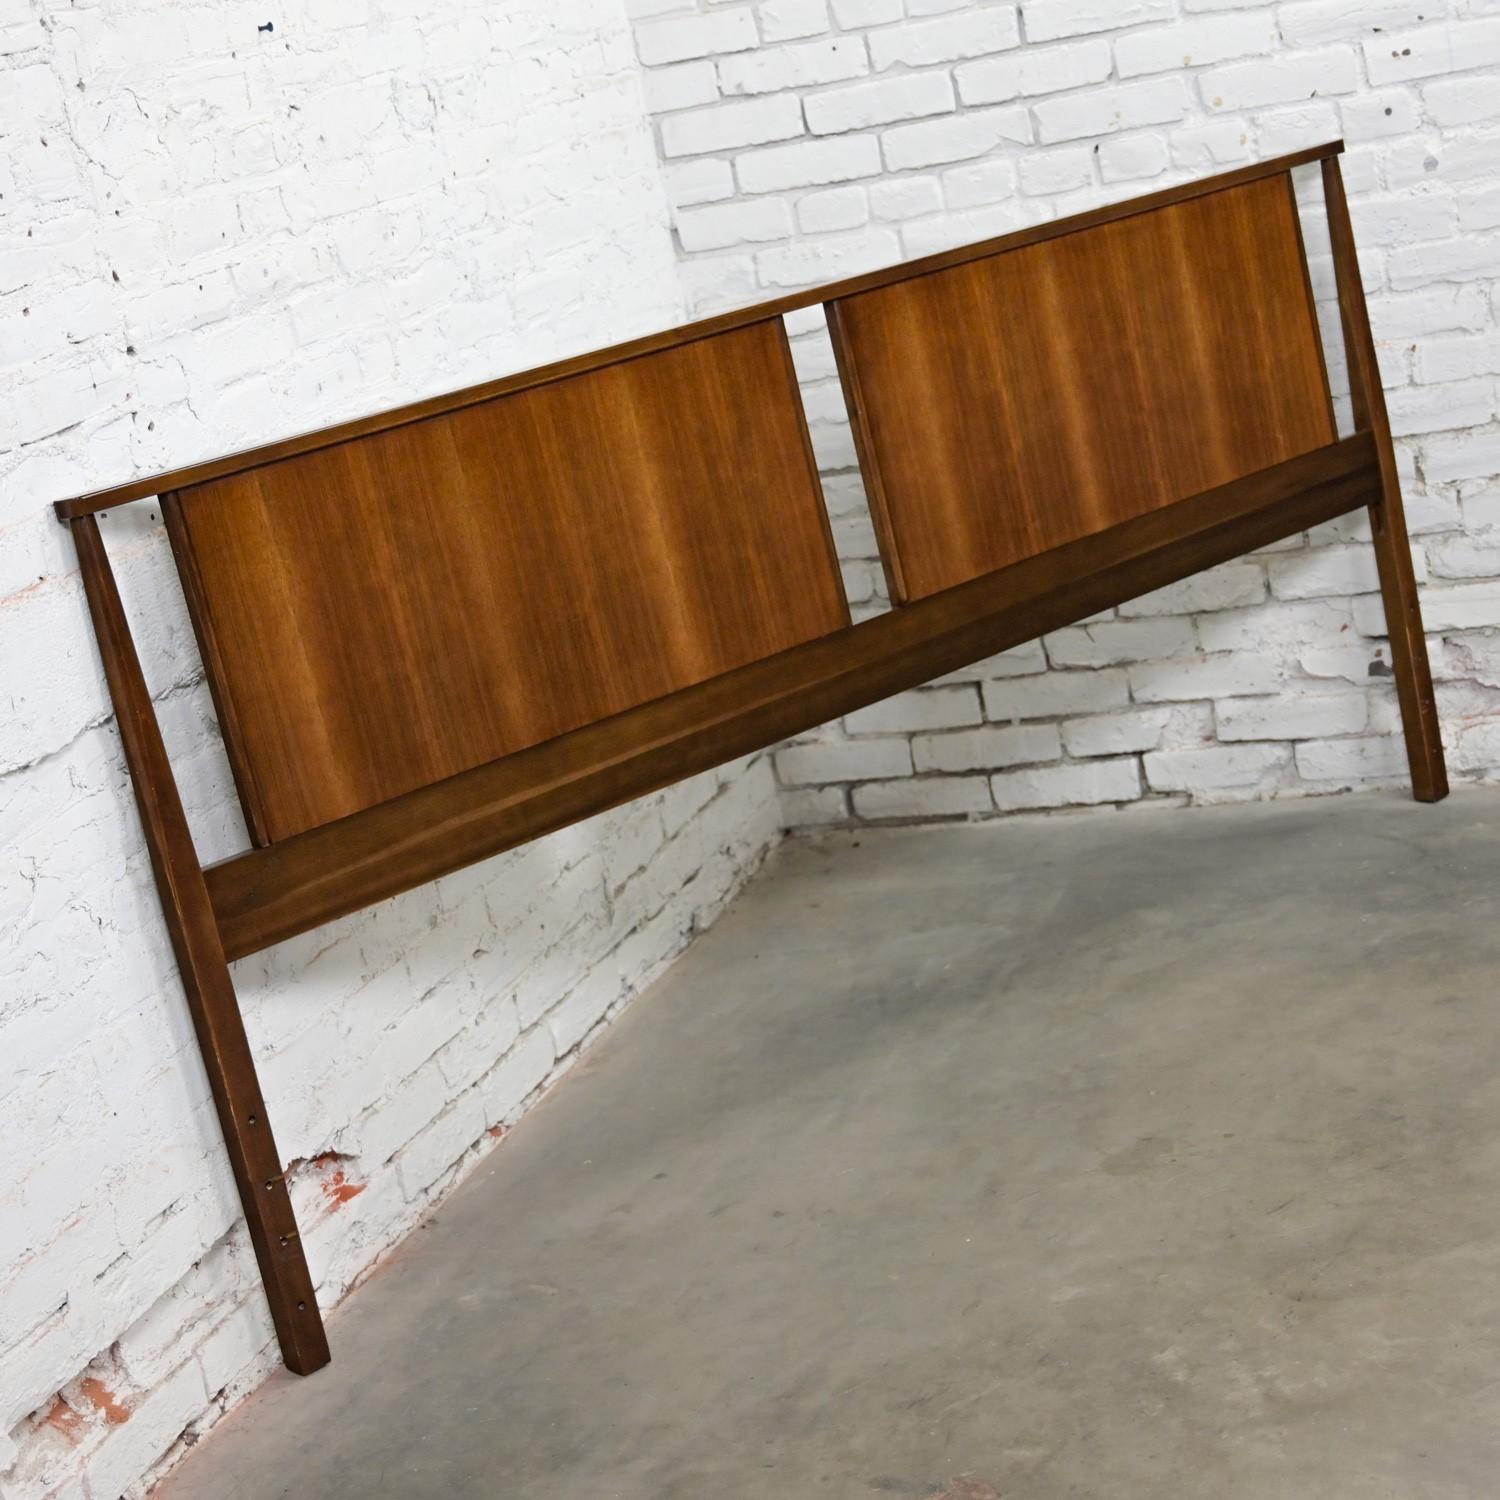 Handsome vintage Mid-Century Modern king sized double paneled walnut headboard. Beautiful original condition, keeping in mind that this is vintage and not new so will have signs of use and wear even if it has been refinished or restored. We have